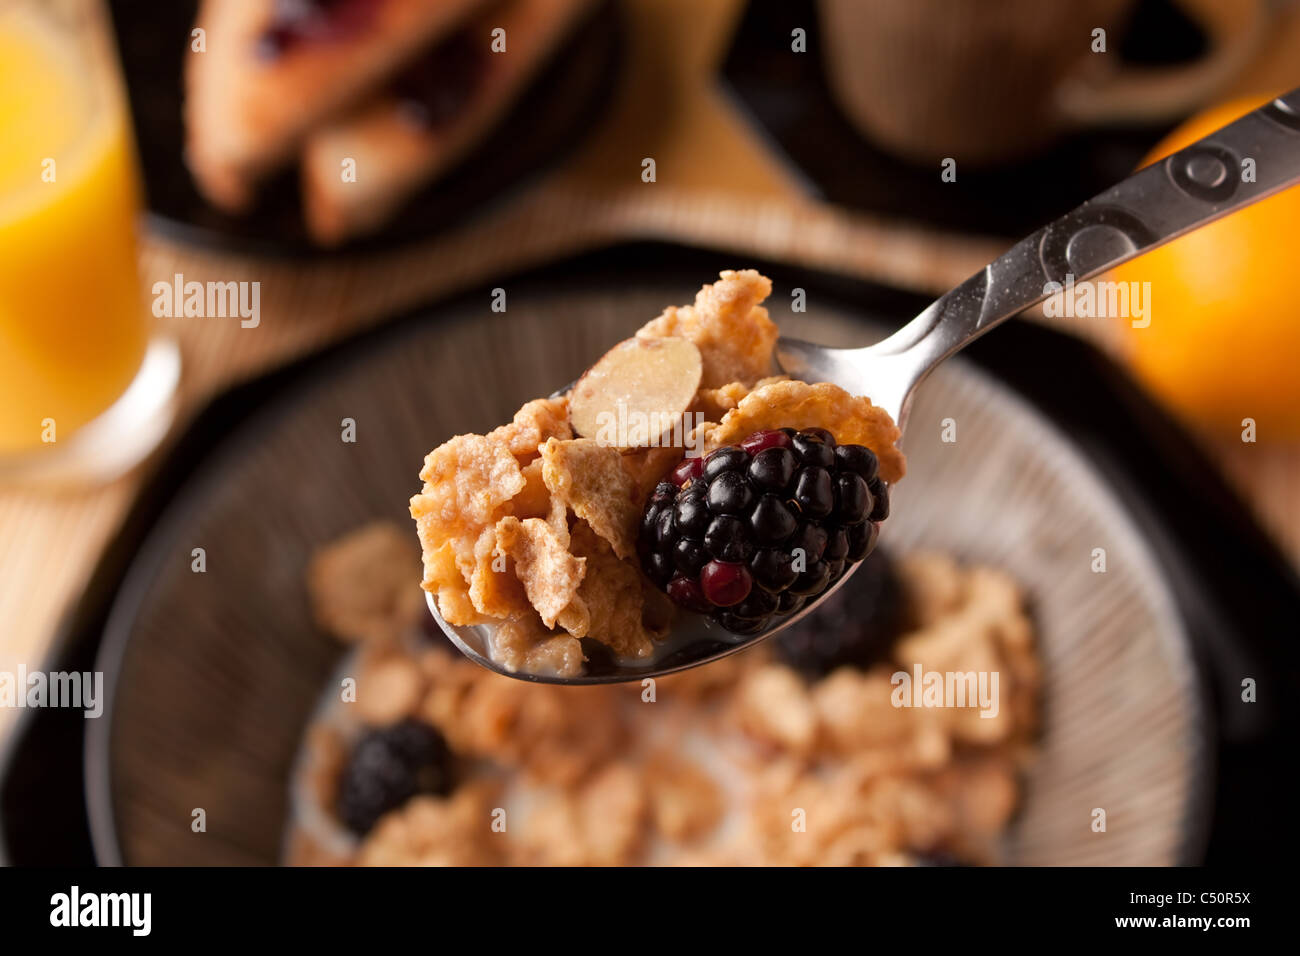 Close up of a spoon full of breakfast cereal flakes with almonds and blackberries. Shallow depth of field. Stock Photo